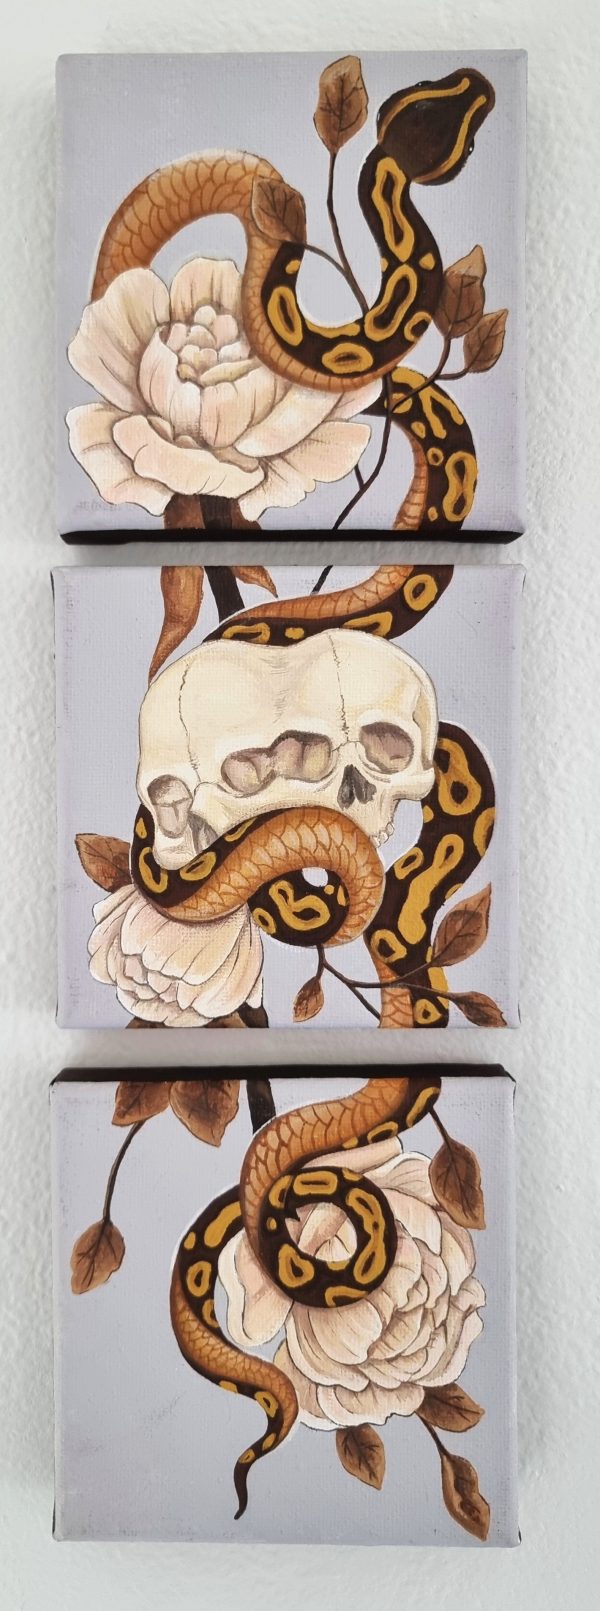 Serpent Triptych - Amy Young